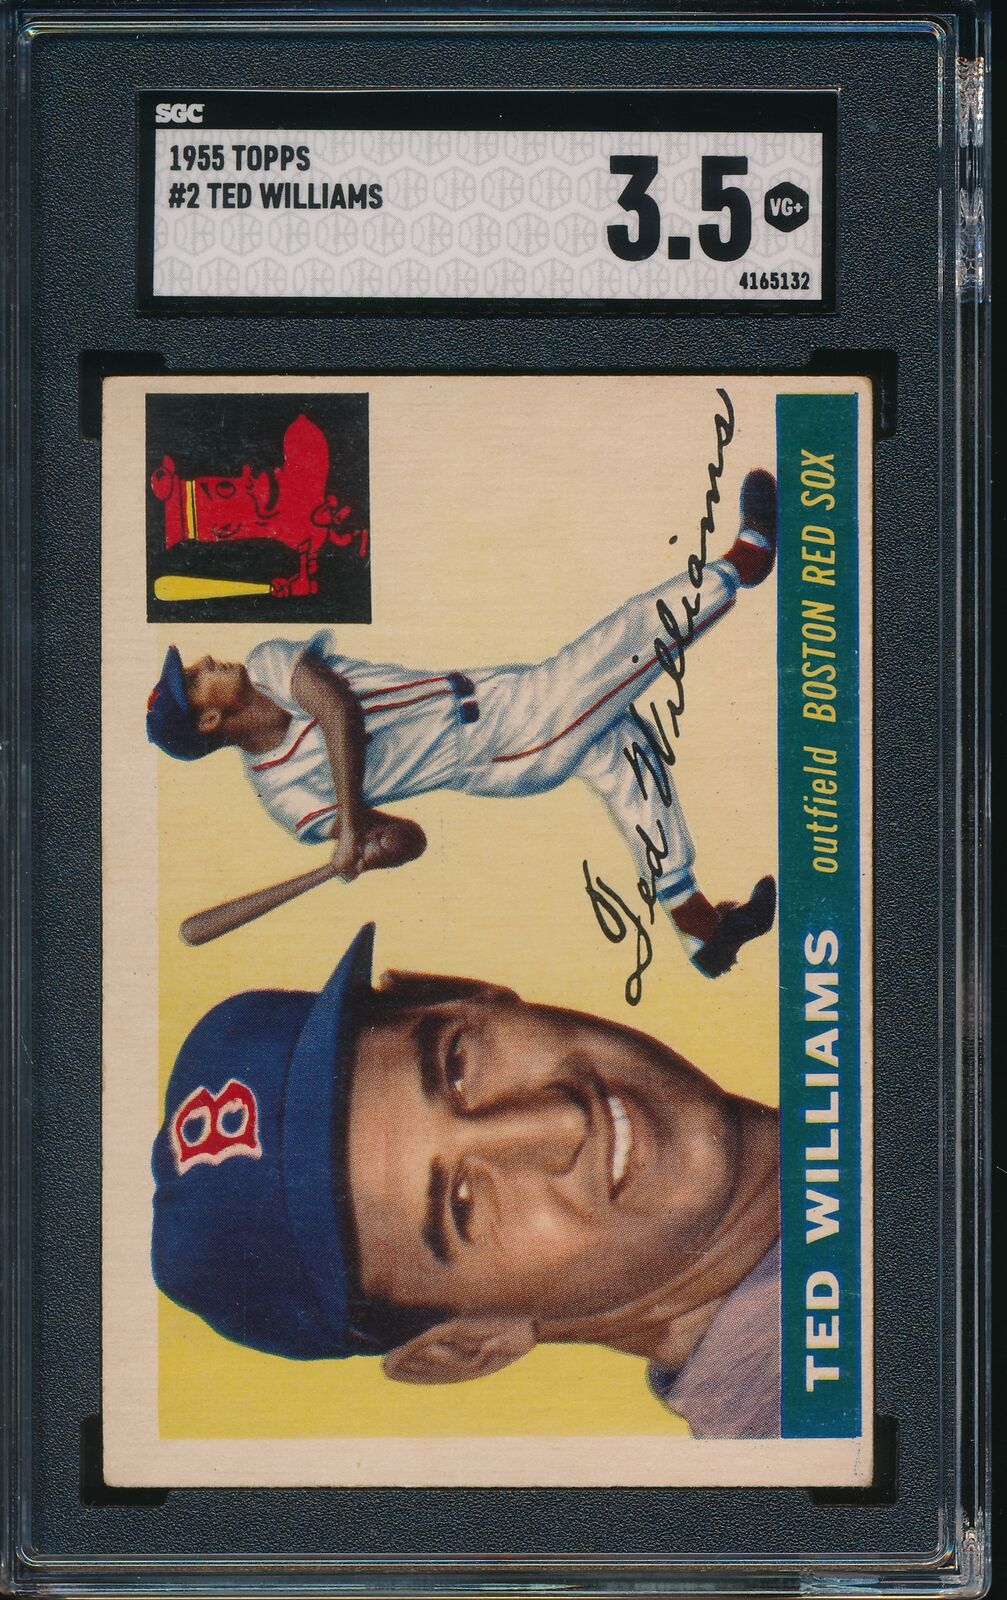 1955 Topps Ted Williams #2 SGC 3.5 VG+ -5132